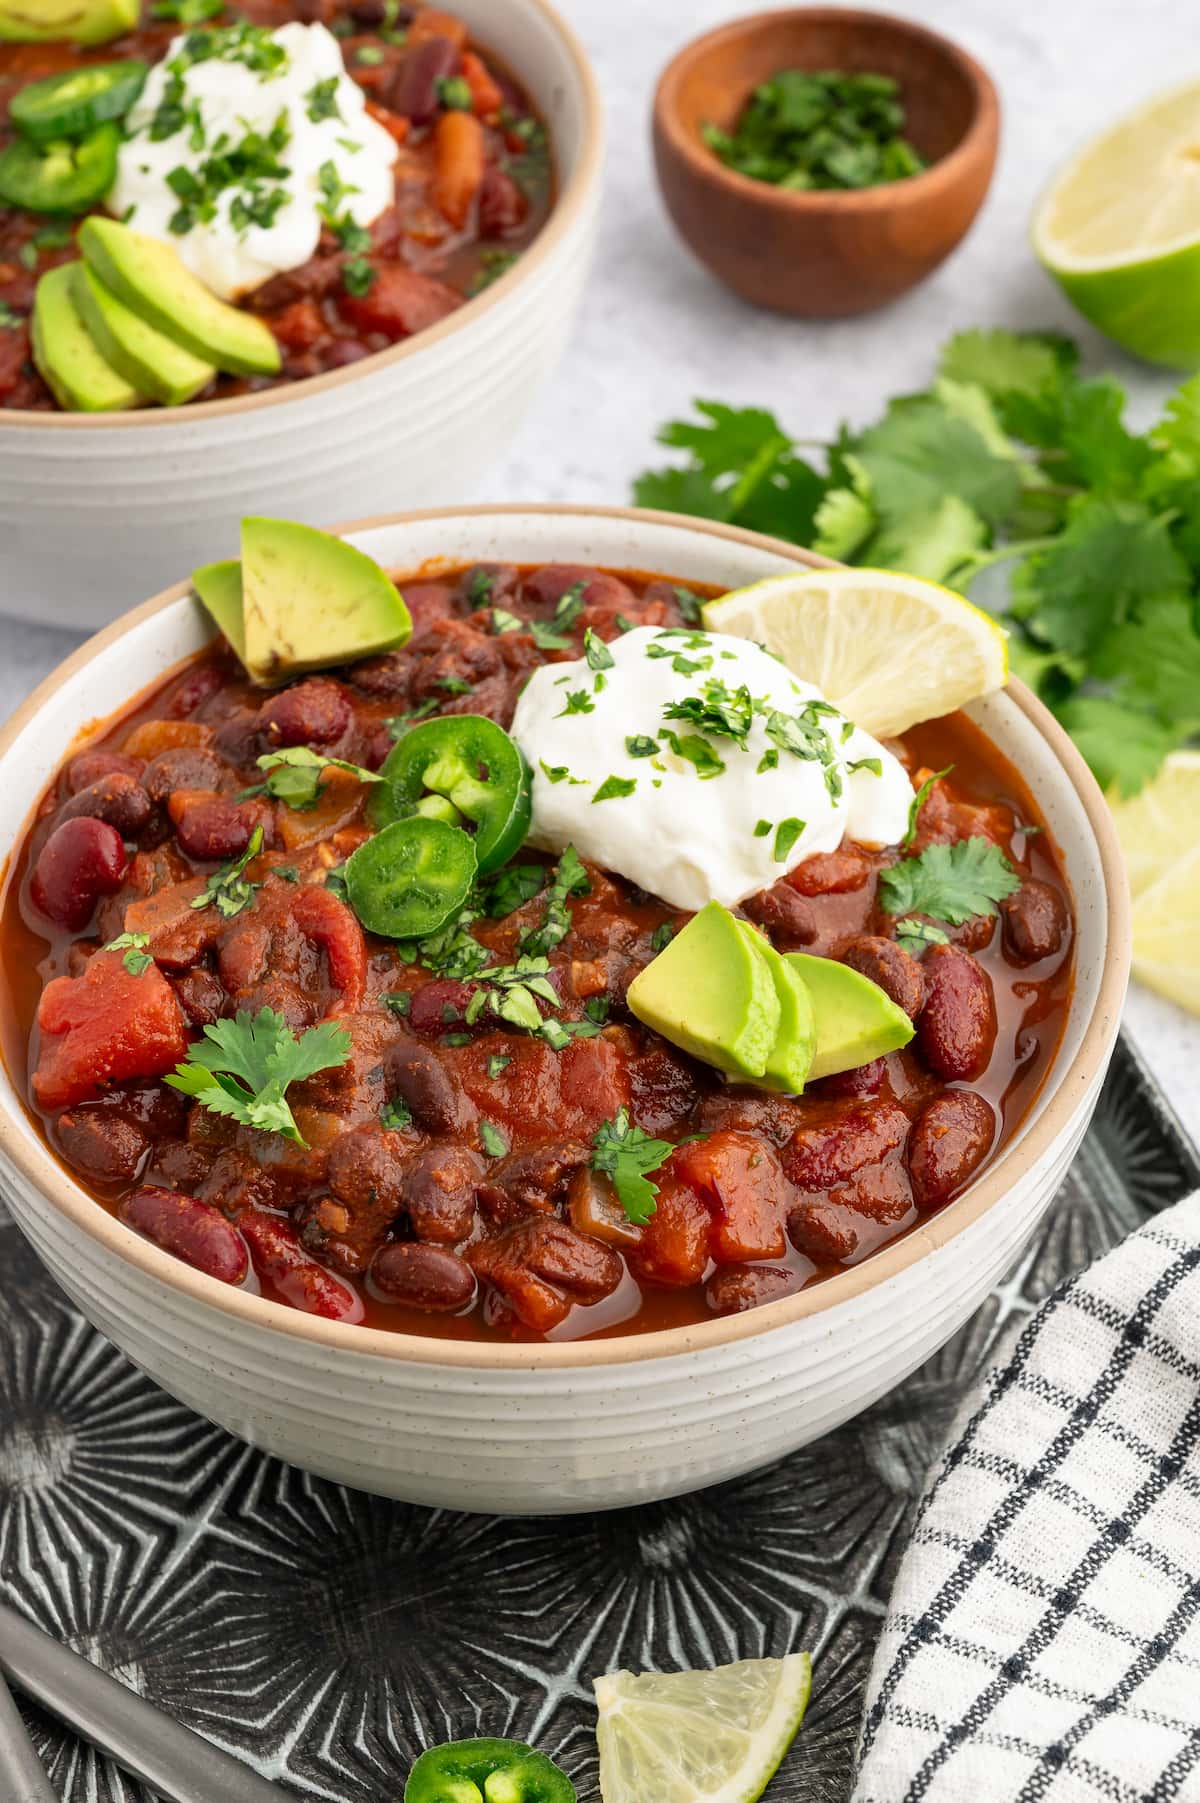 Vegan chili in a bowl topped with cilantro, vegan sour cream, jalapeno and avocado slices.